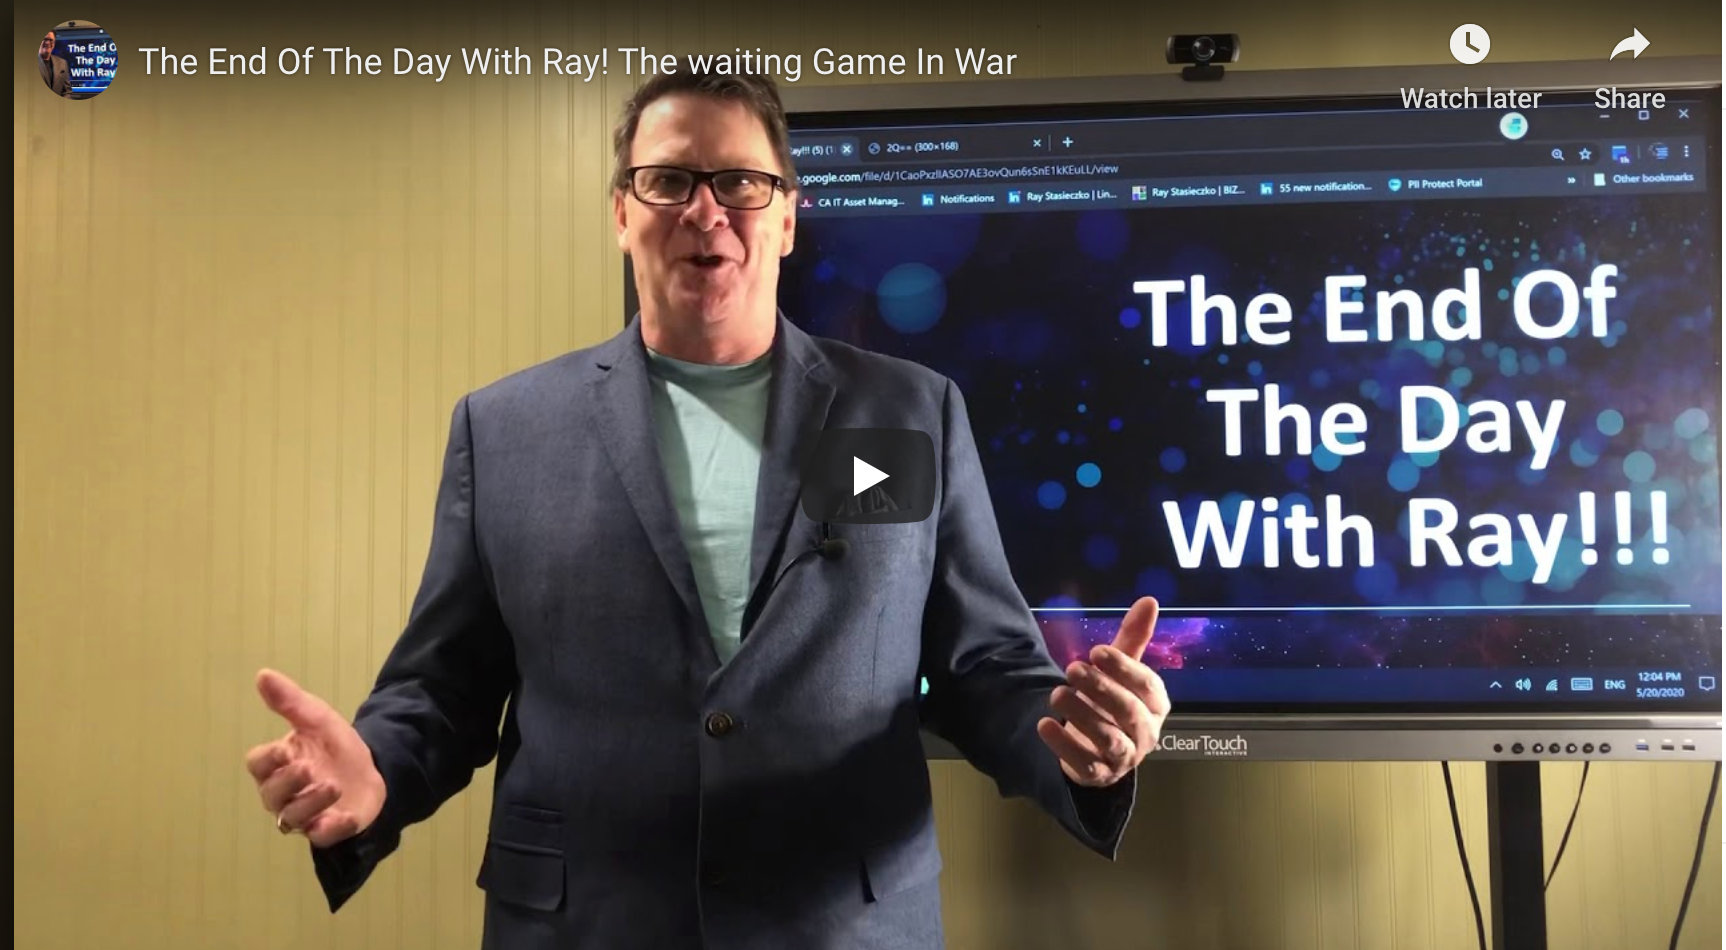 The End Of The Day With Ray! The waiting Game In War